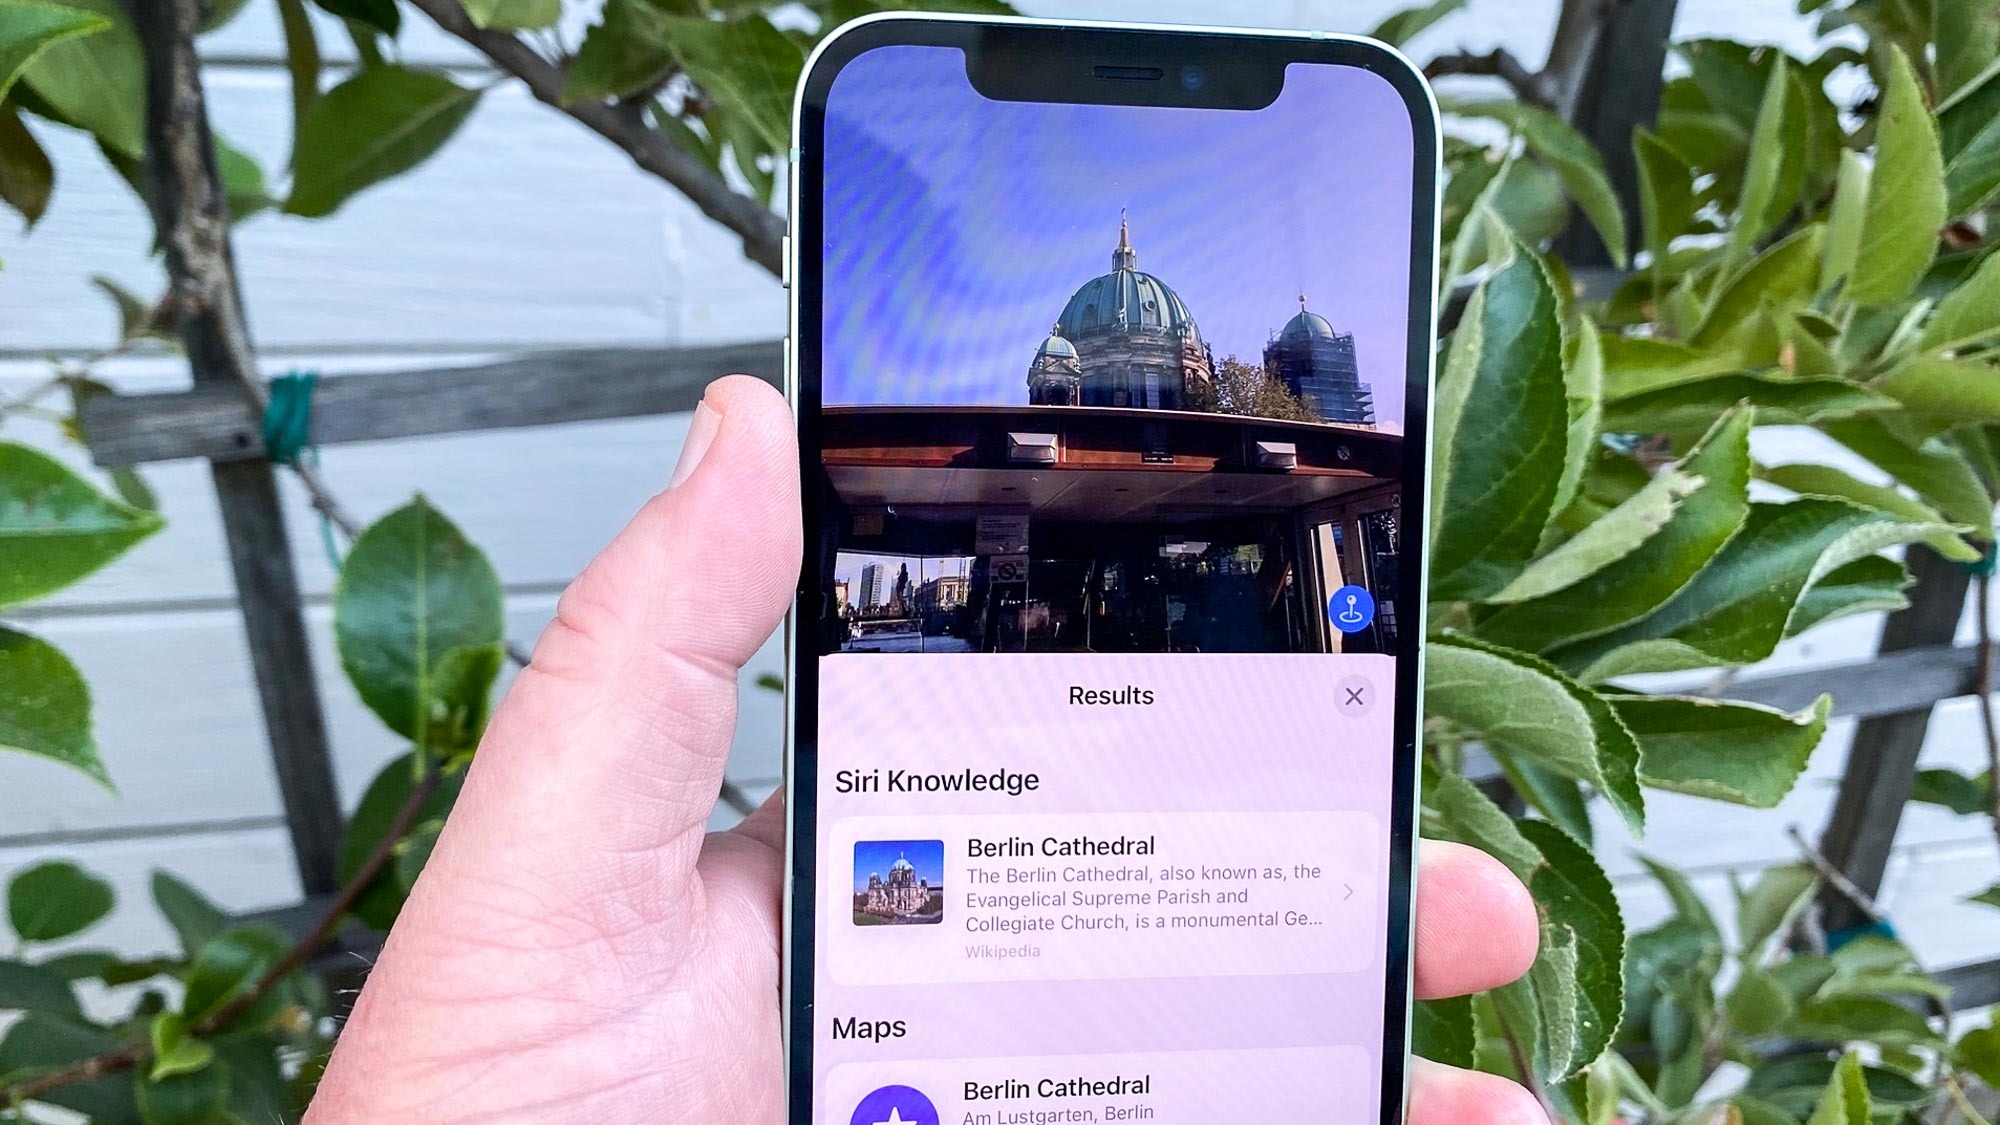 How to use Visual Search in iOS 15